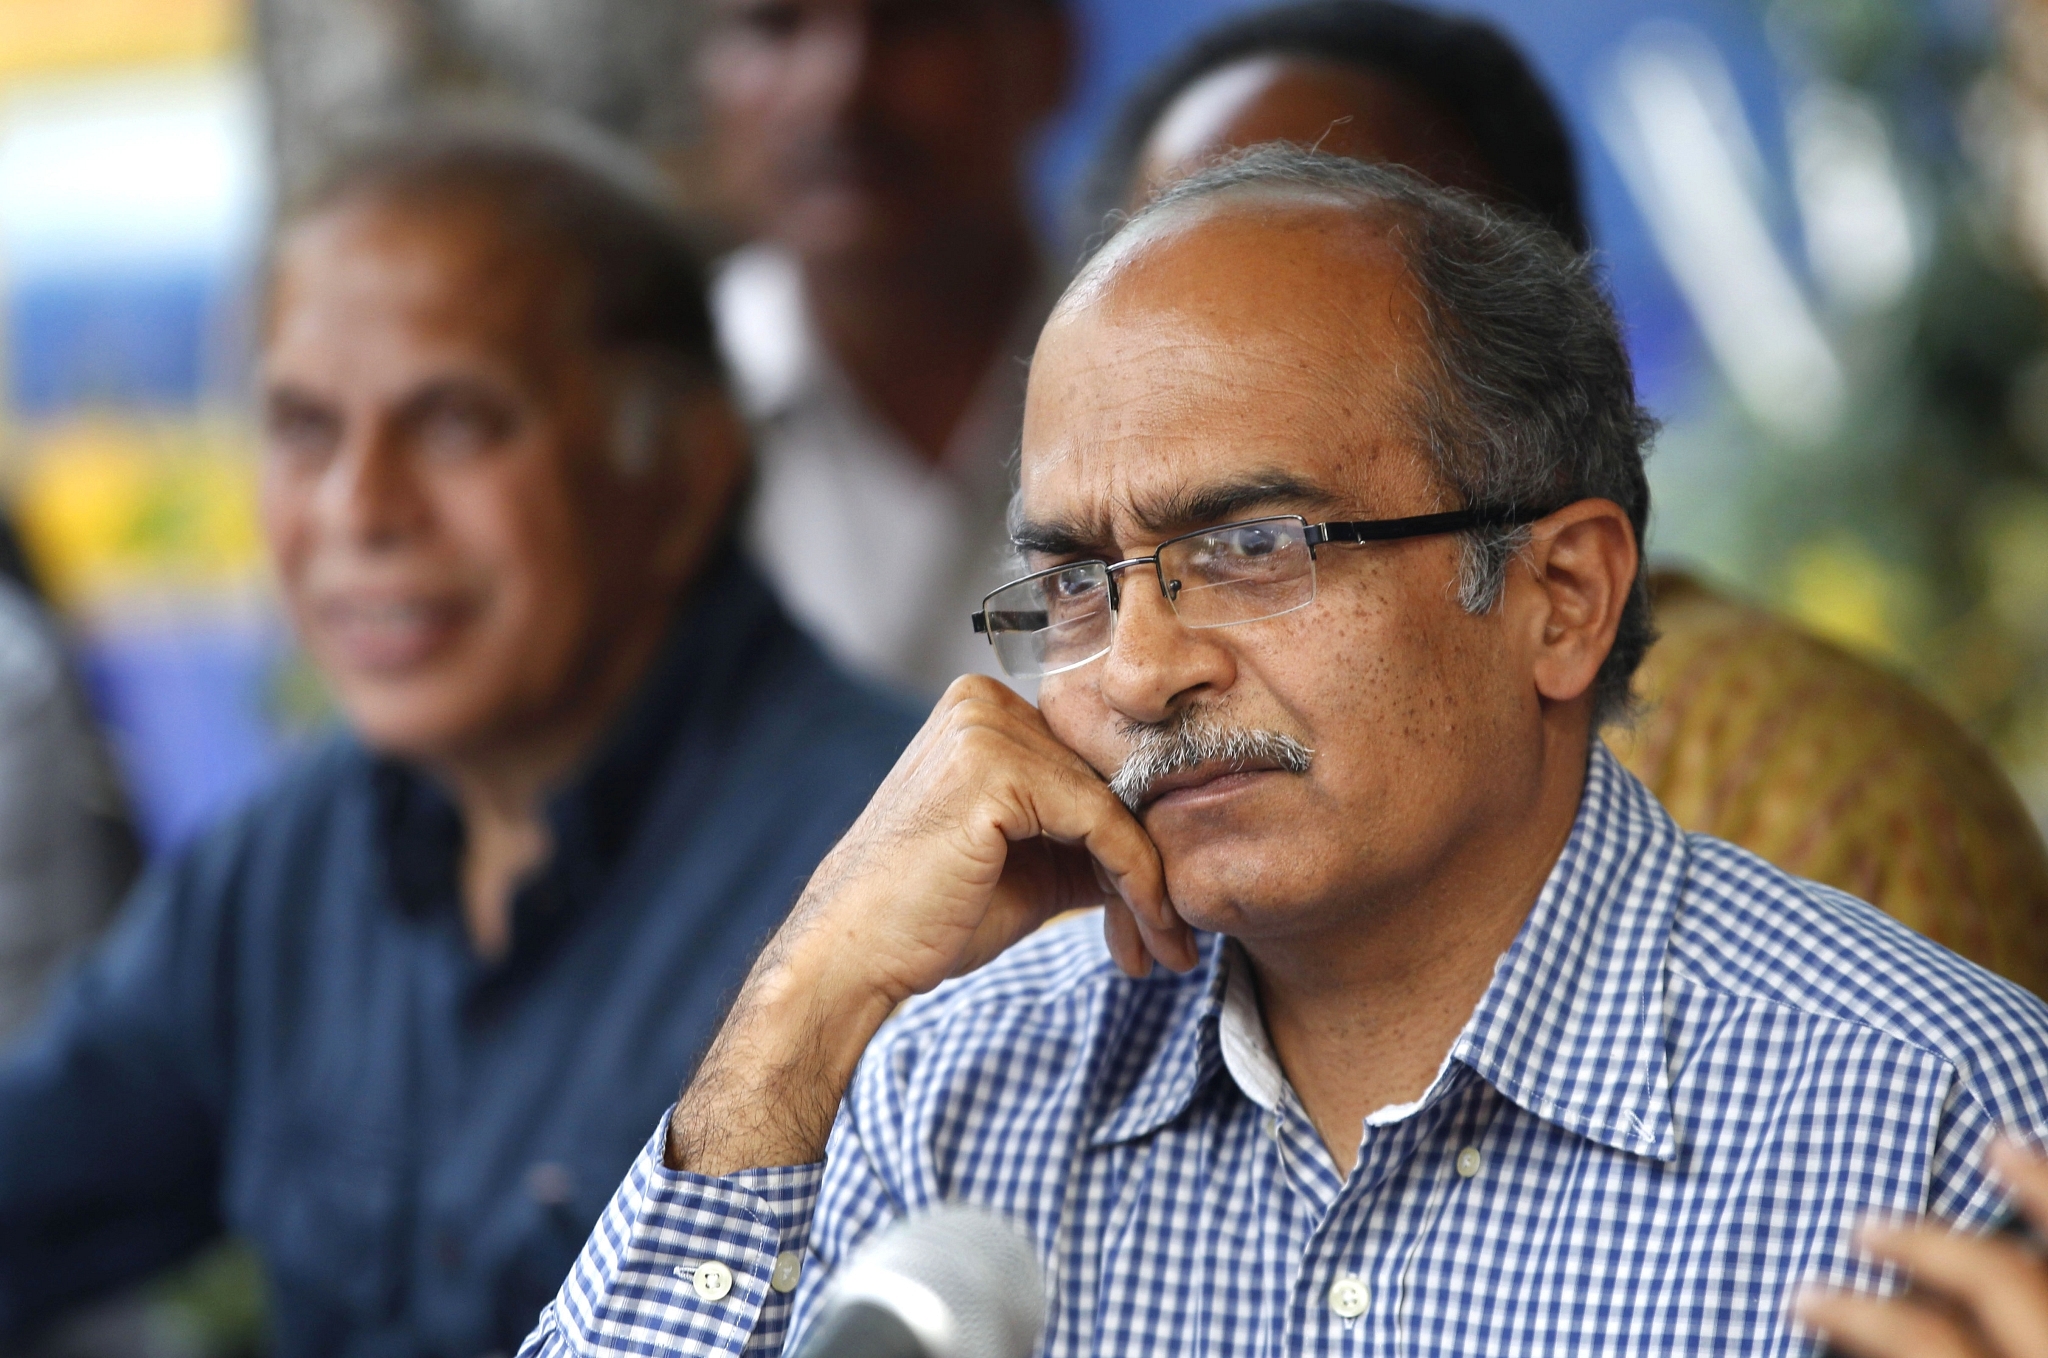 Prashant Bhushan during a press conference at the Press Club of India (Ajay Aggarwal/ Hindustan Times via Getty Images)